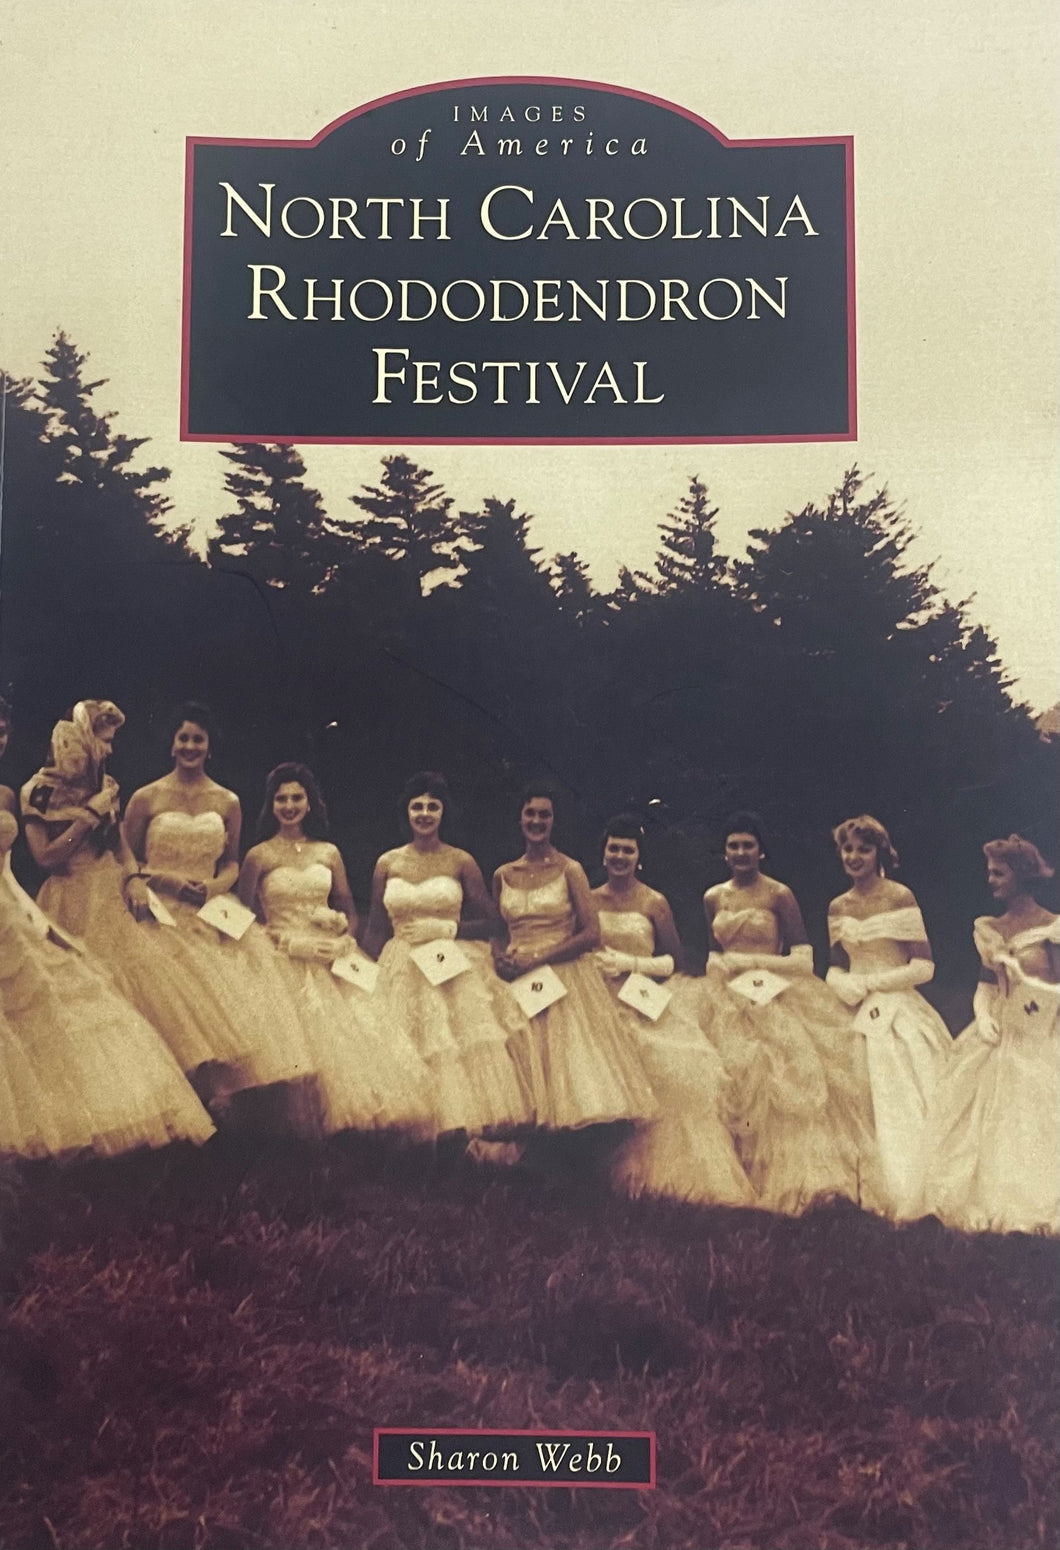 NC RHODODENDRON FEST